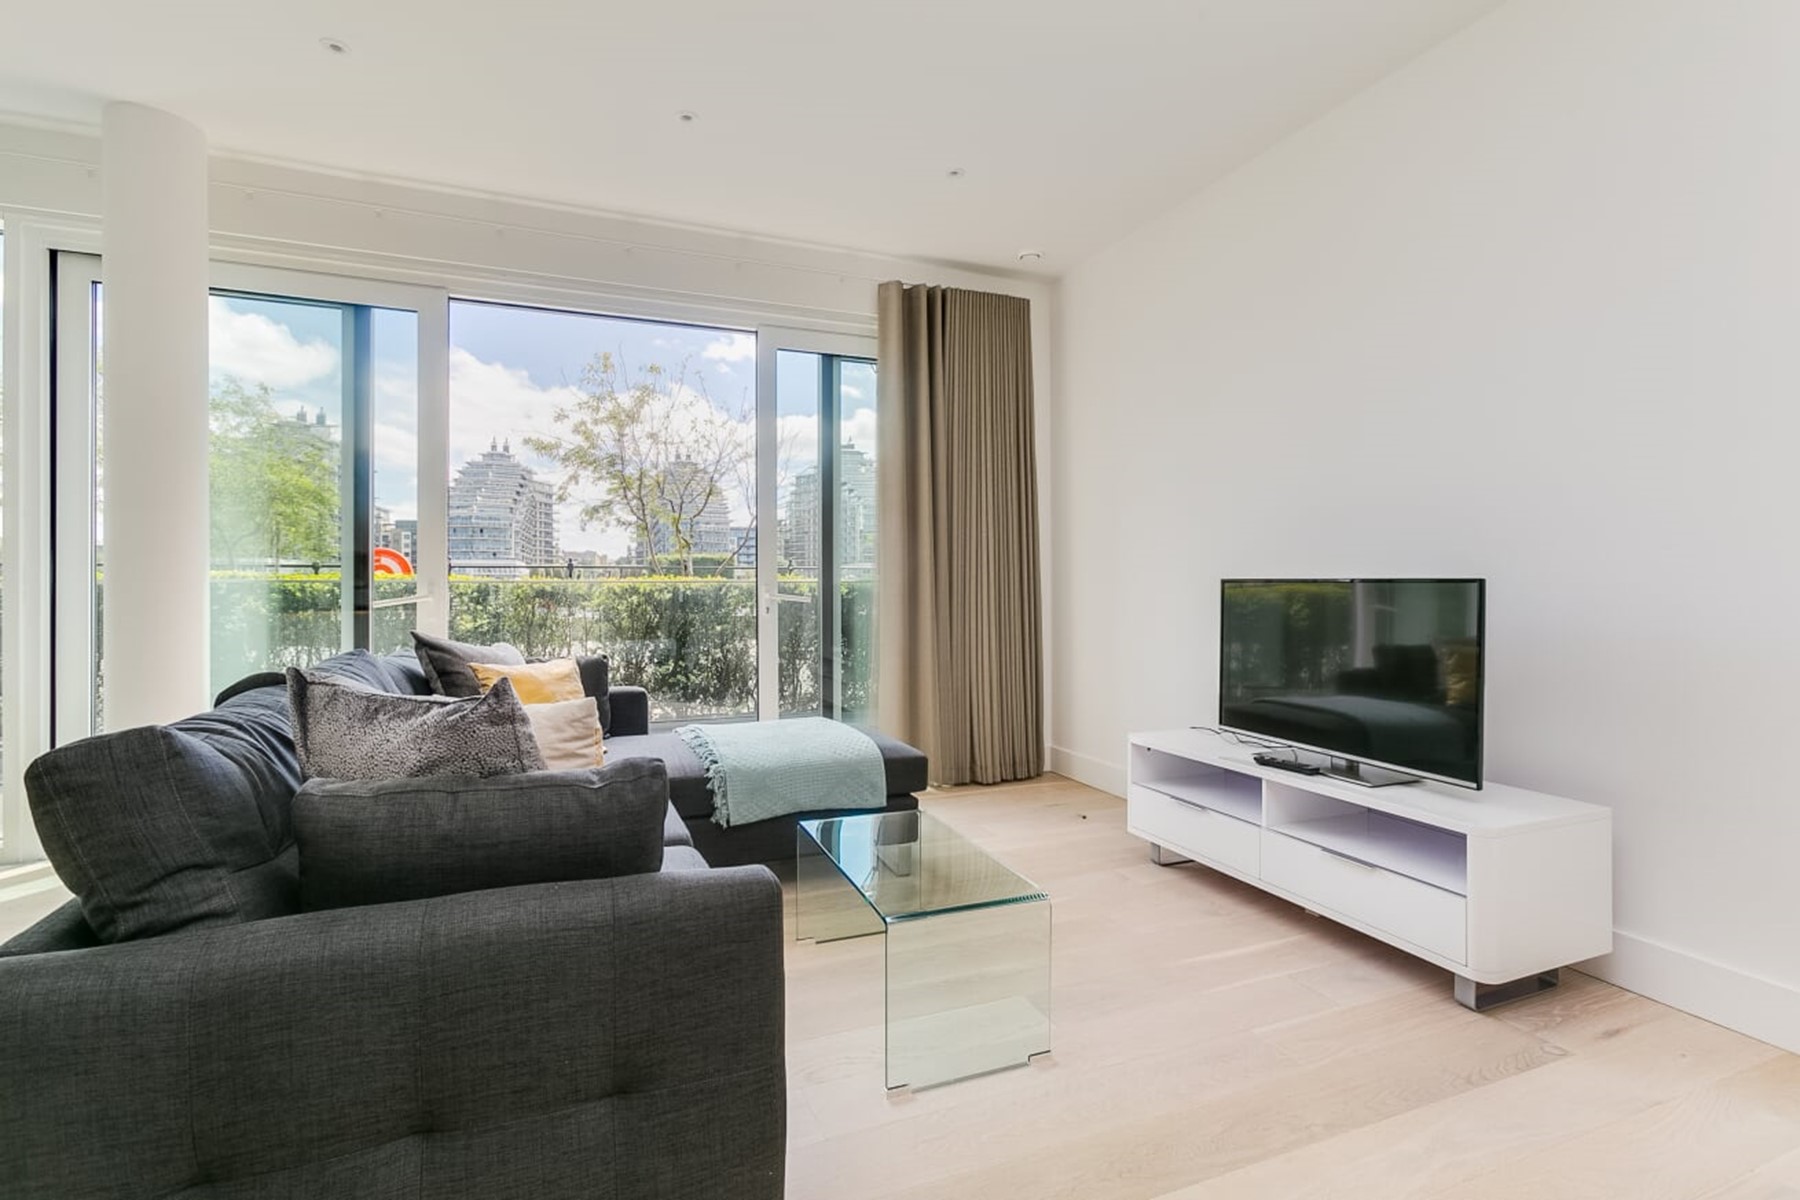 Two Bed River View Apartments in Fulham | MyLo Fulham | Fulham ...